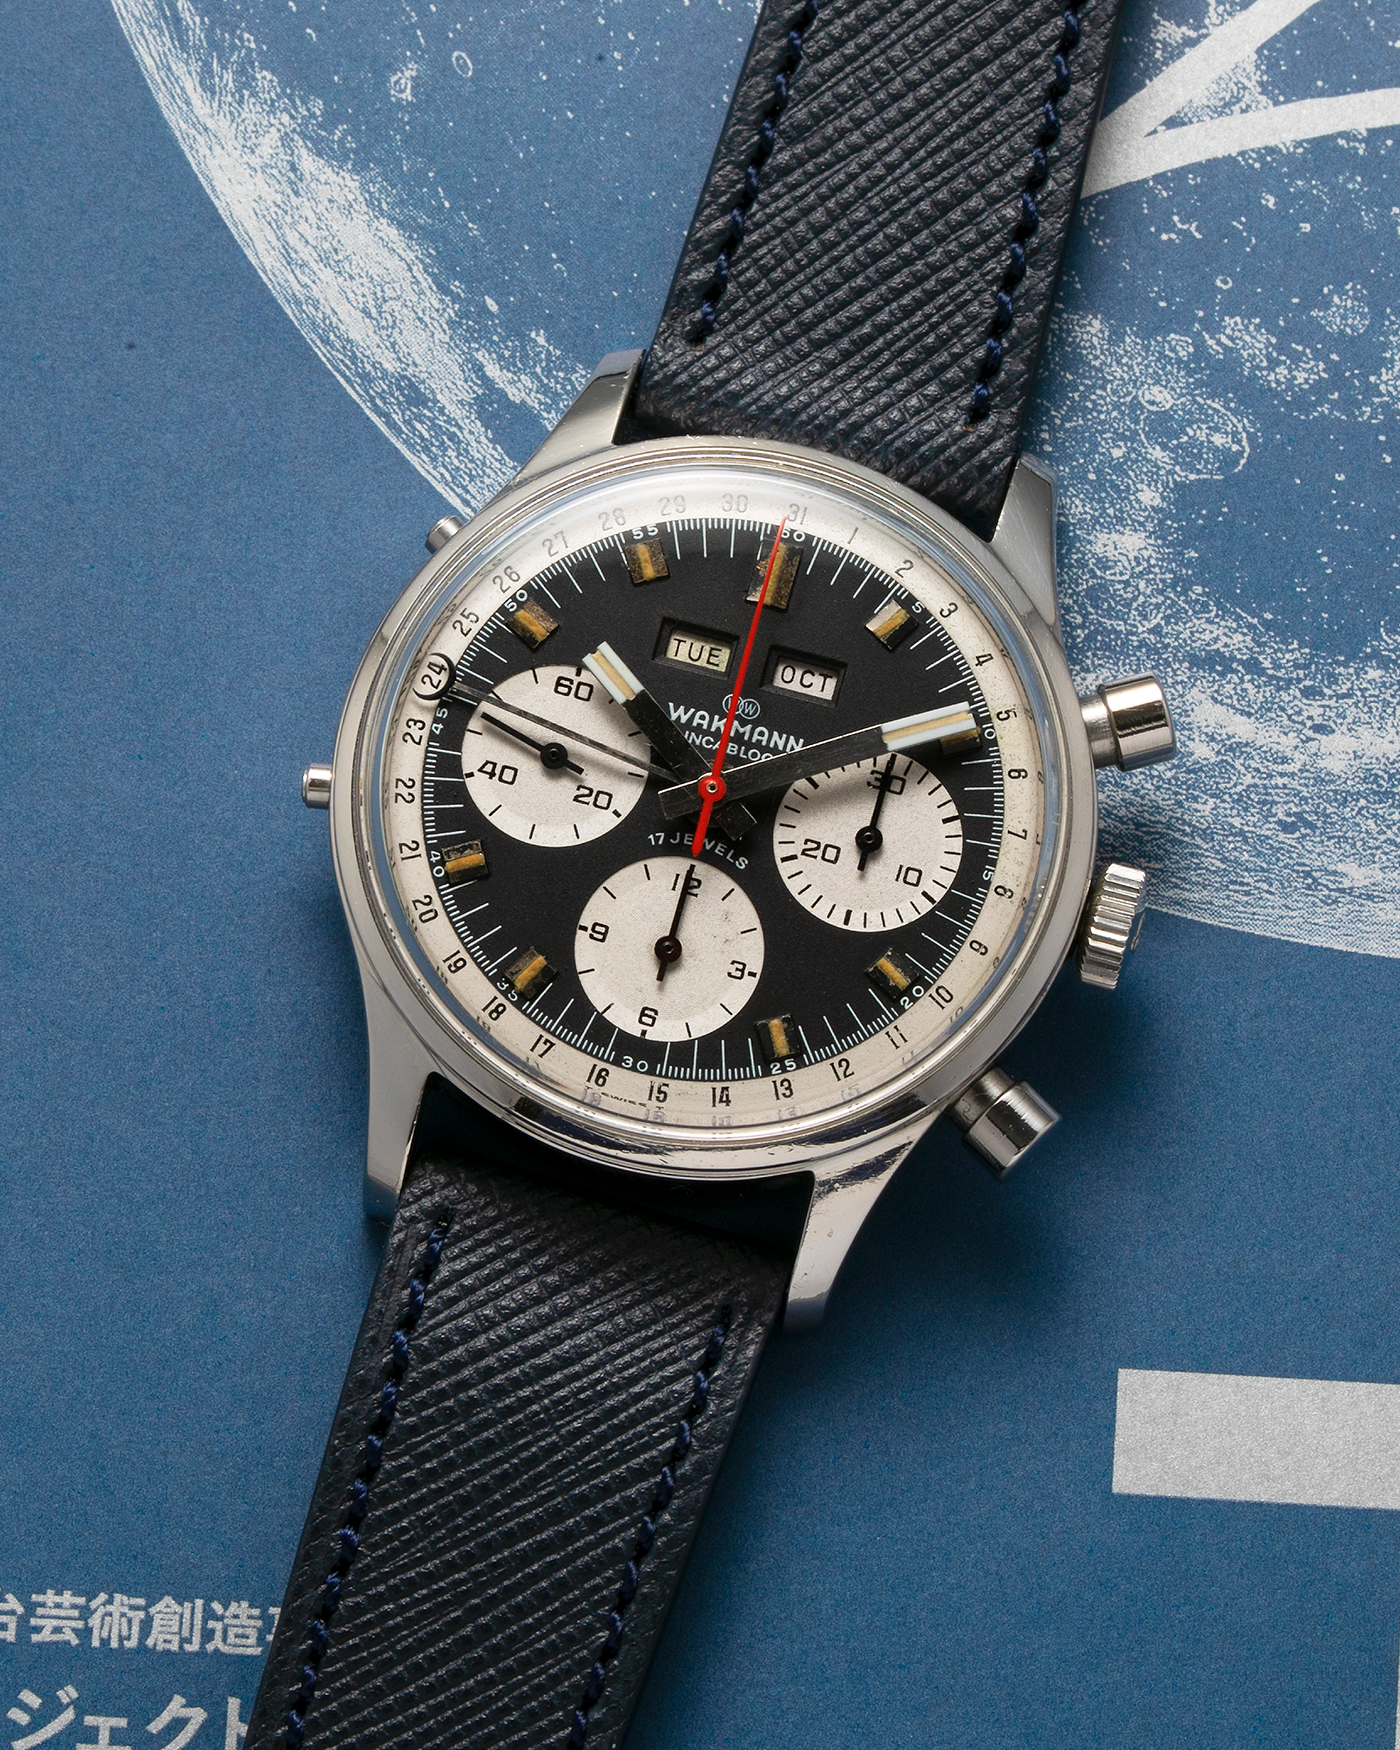 Brand: Wakmann Year: 1970’s Model: Triple Calendar Chronograph Reference Number: 71.1309.70 Material: Stainless Steel Movement: Valjoux Cal. 723, Manual-Winding Case Diameter: 37mm Lug Width: 20mm Strap: Molequin Navy Blue Textured Calf Leather Strap